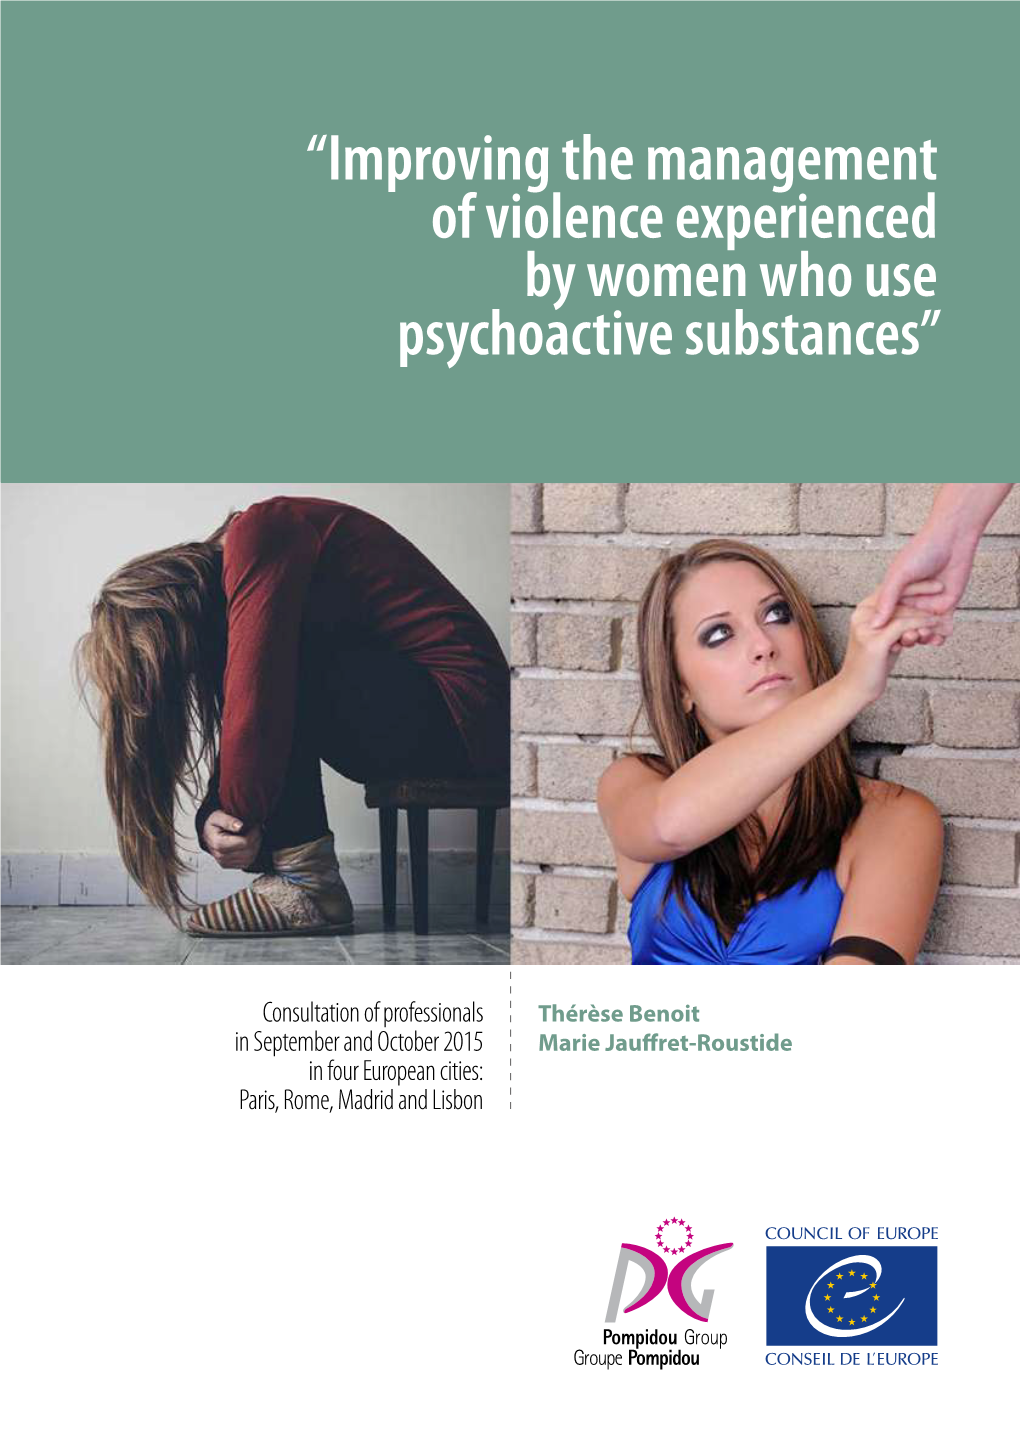 Improving the Management of Violence Experienced by Women Who Use Psychoactive Substances”